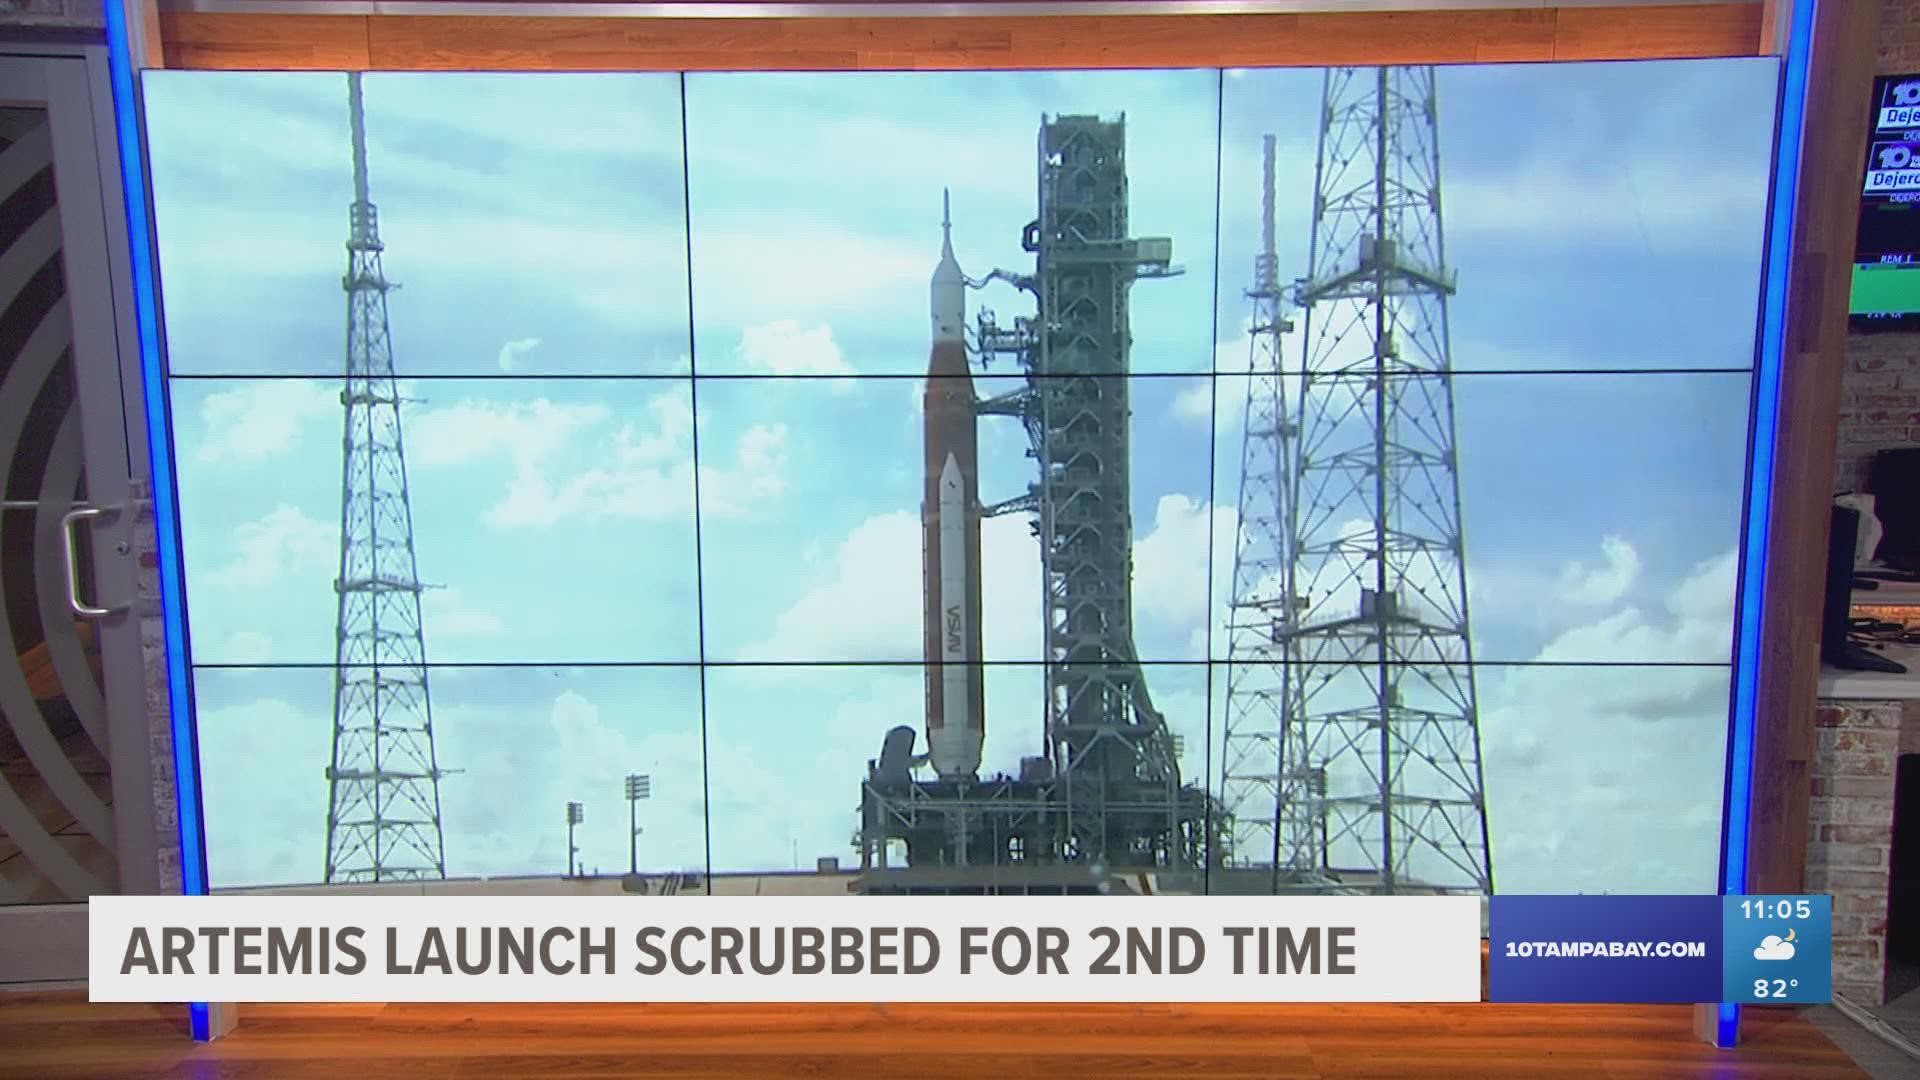 Extensive inspections and repairs could push the launch into October.